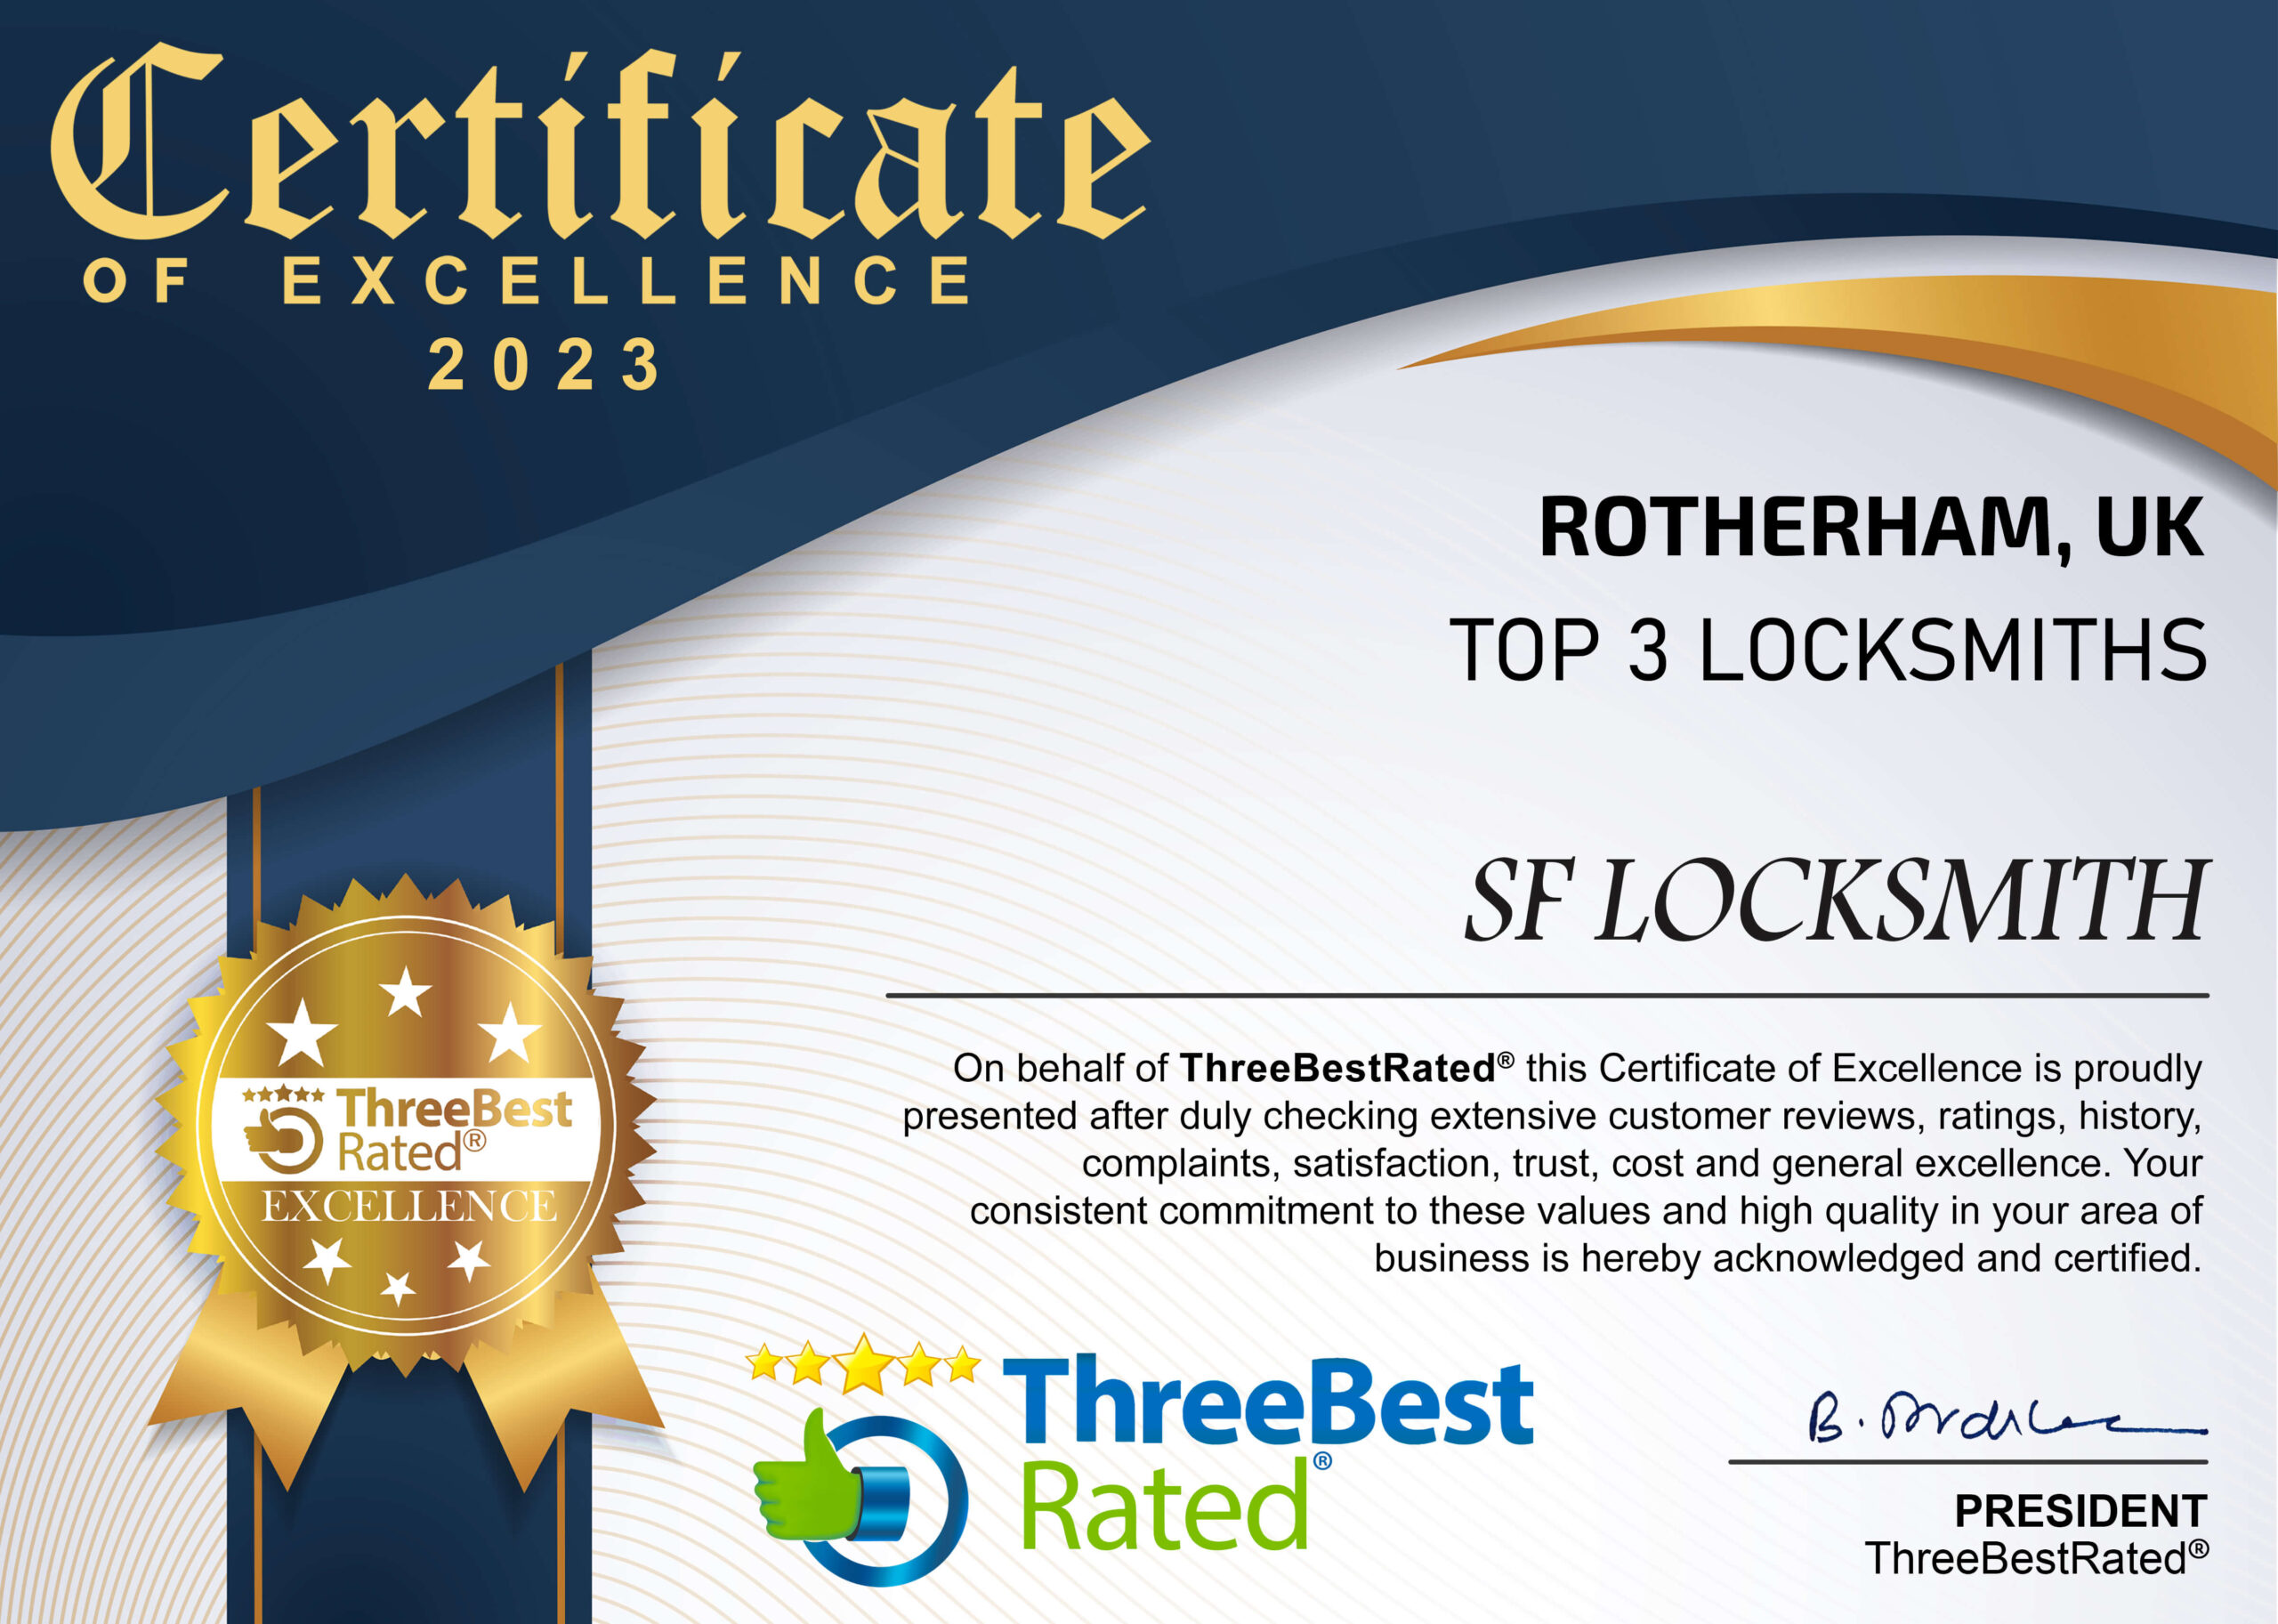 SF Locksmith Rotherham wins certificate of excellent 2023 from Three Best Rated